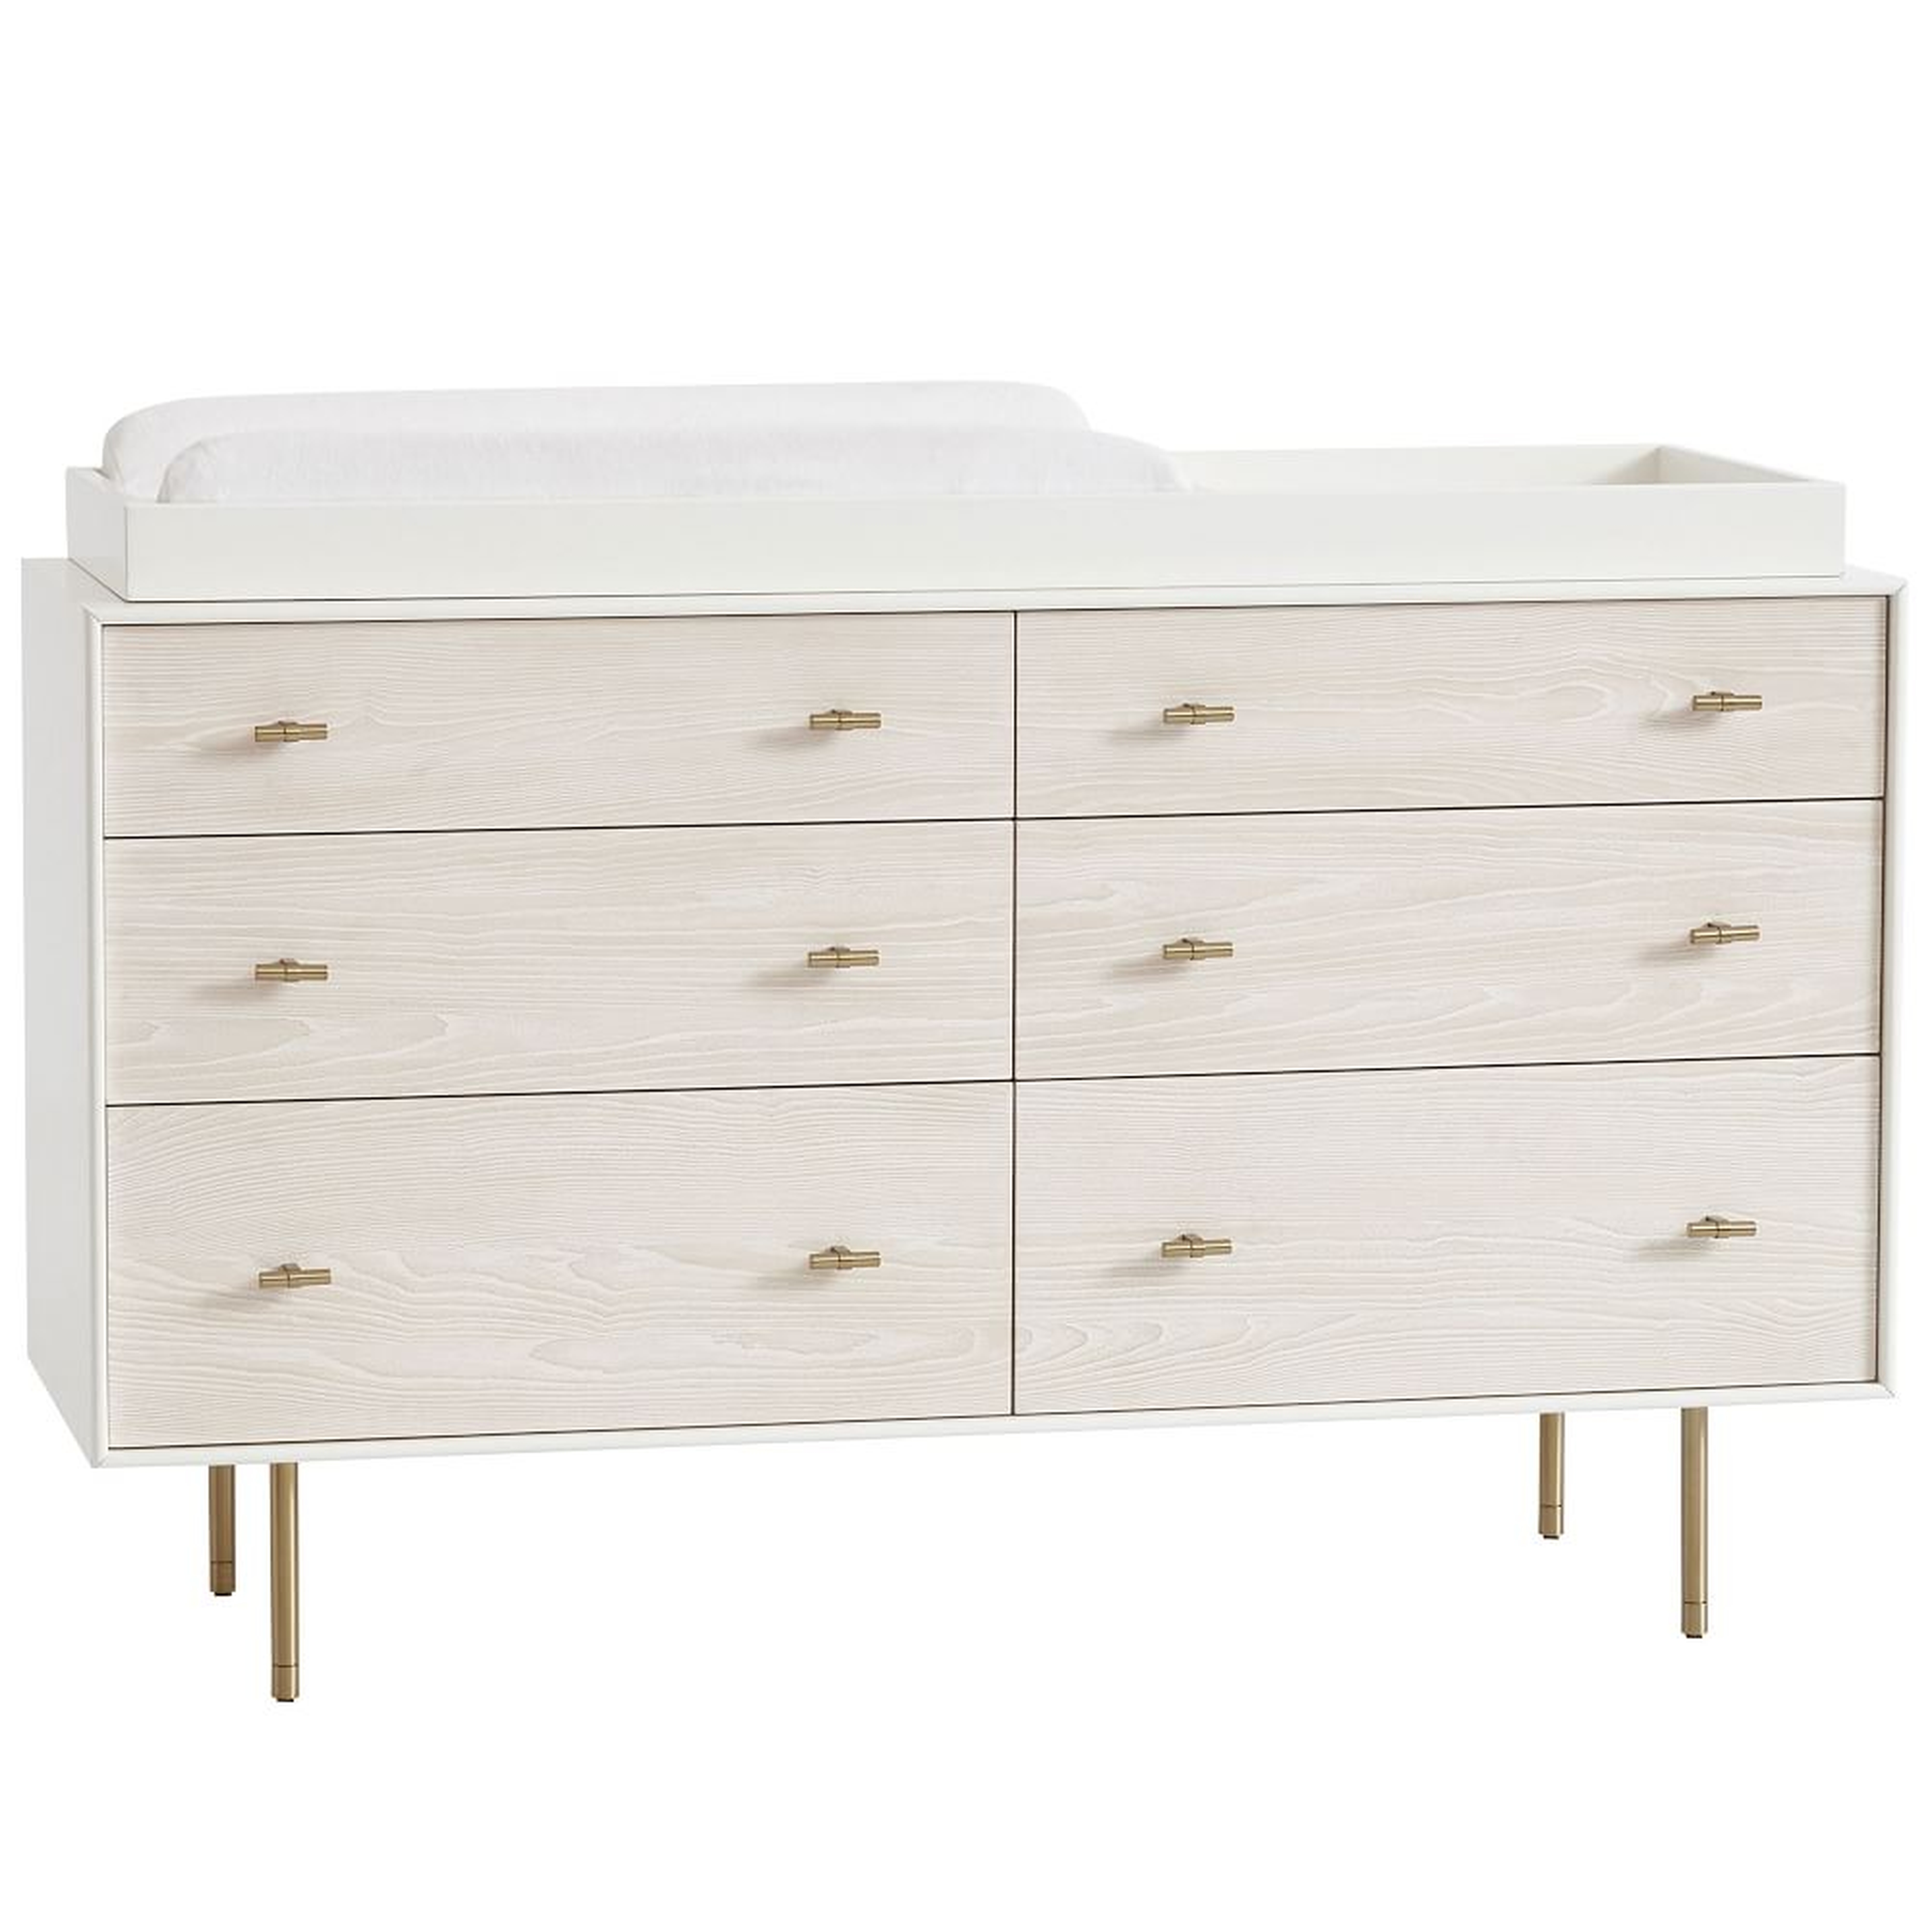 Modernist Changing Table Pack, 6 Drawers, White + Winter Wood, WE Kids - West Elm